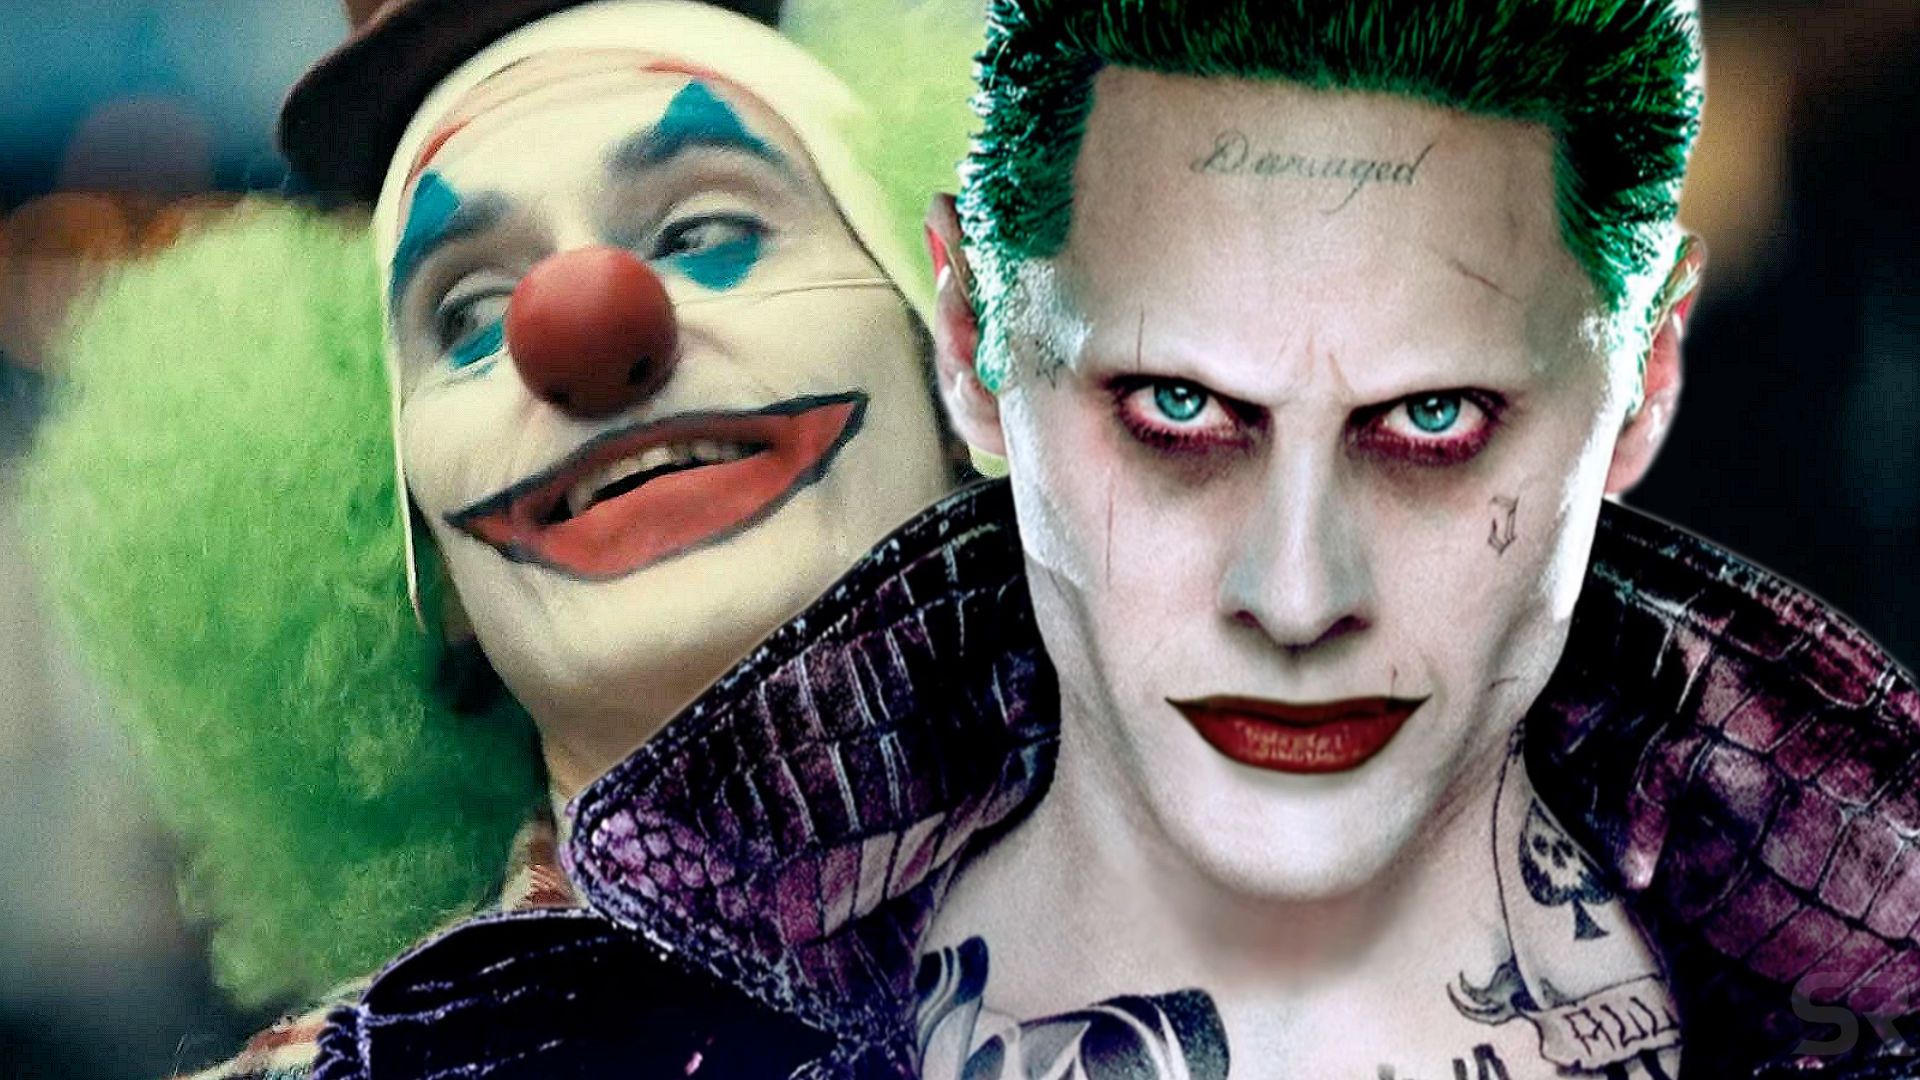 Joker: The True Story Behind Jared Leto's Controversial Version